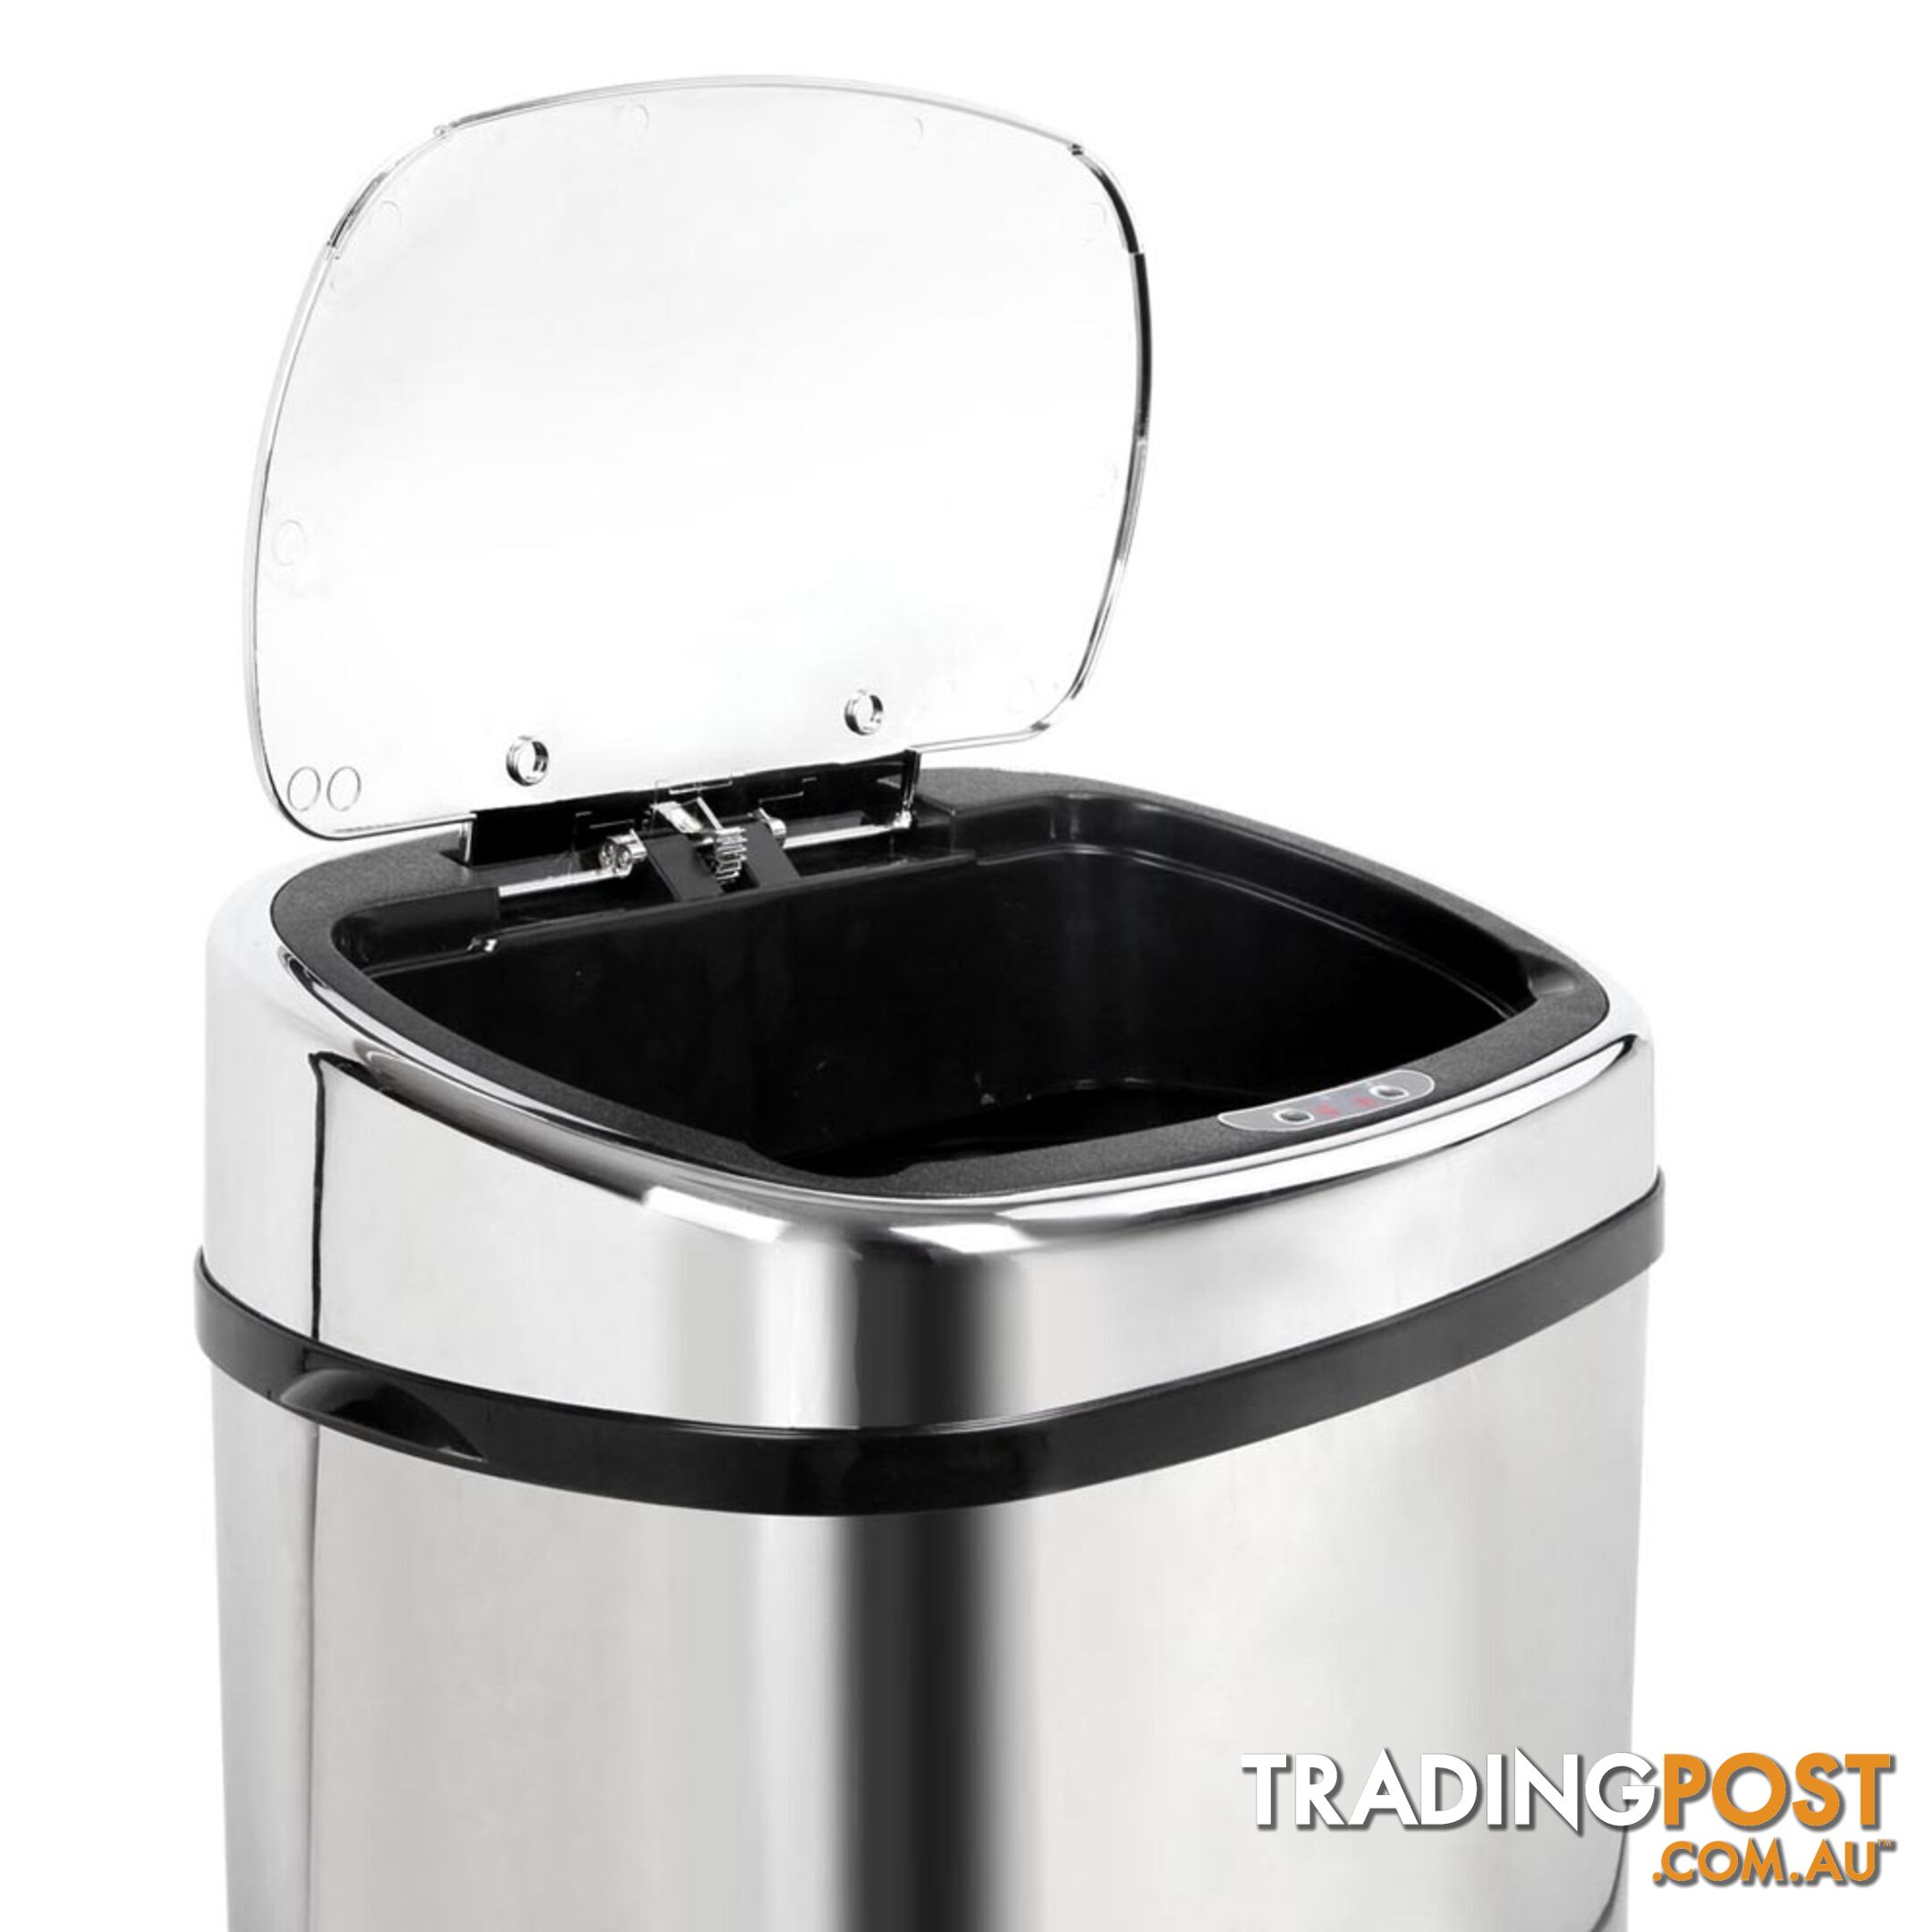 68L Motion Sensor Stainless Steel Rubbish Bin Automatic Kitchen Waste Trash Can